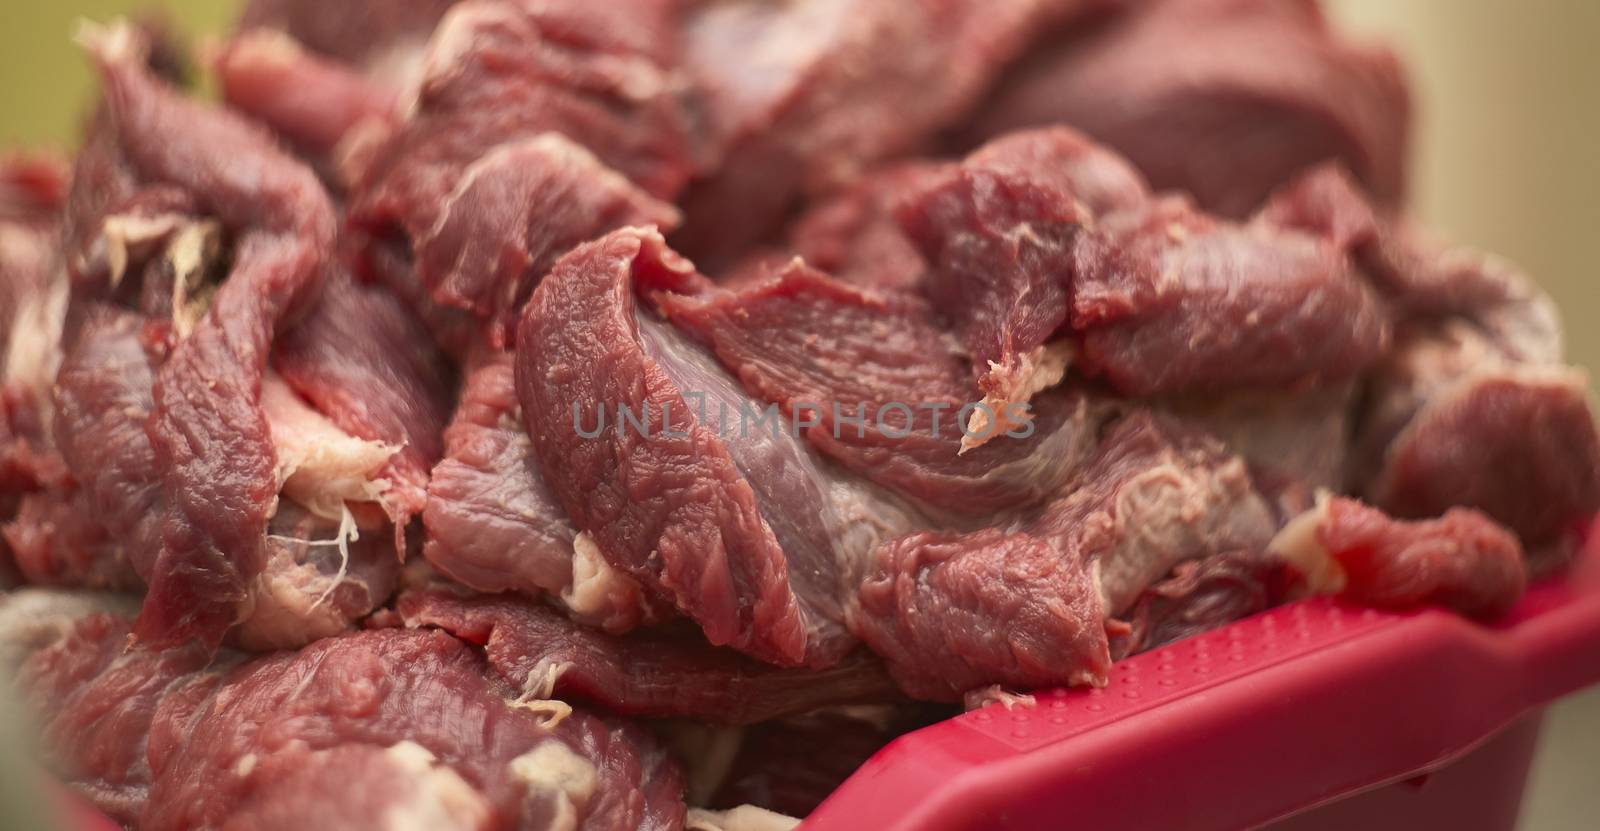 Fiber and details of calf meat by pippocarlot